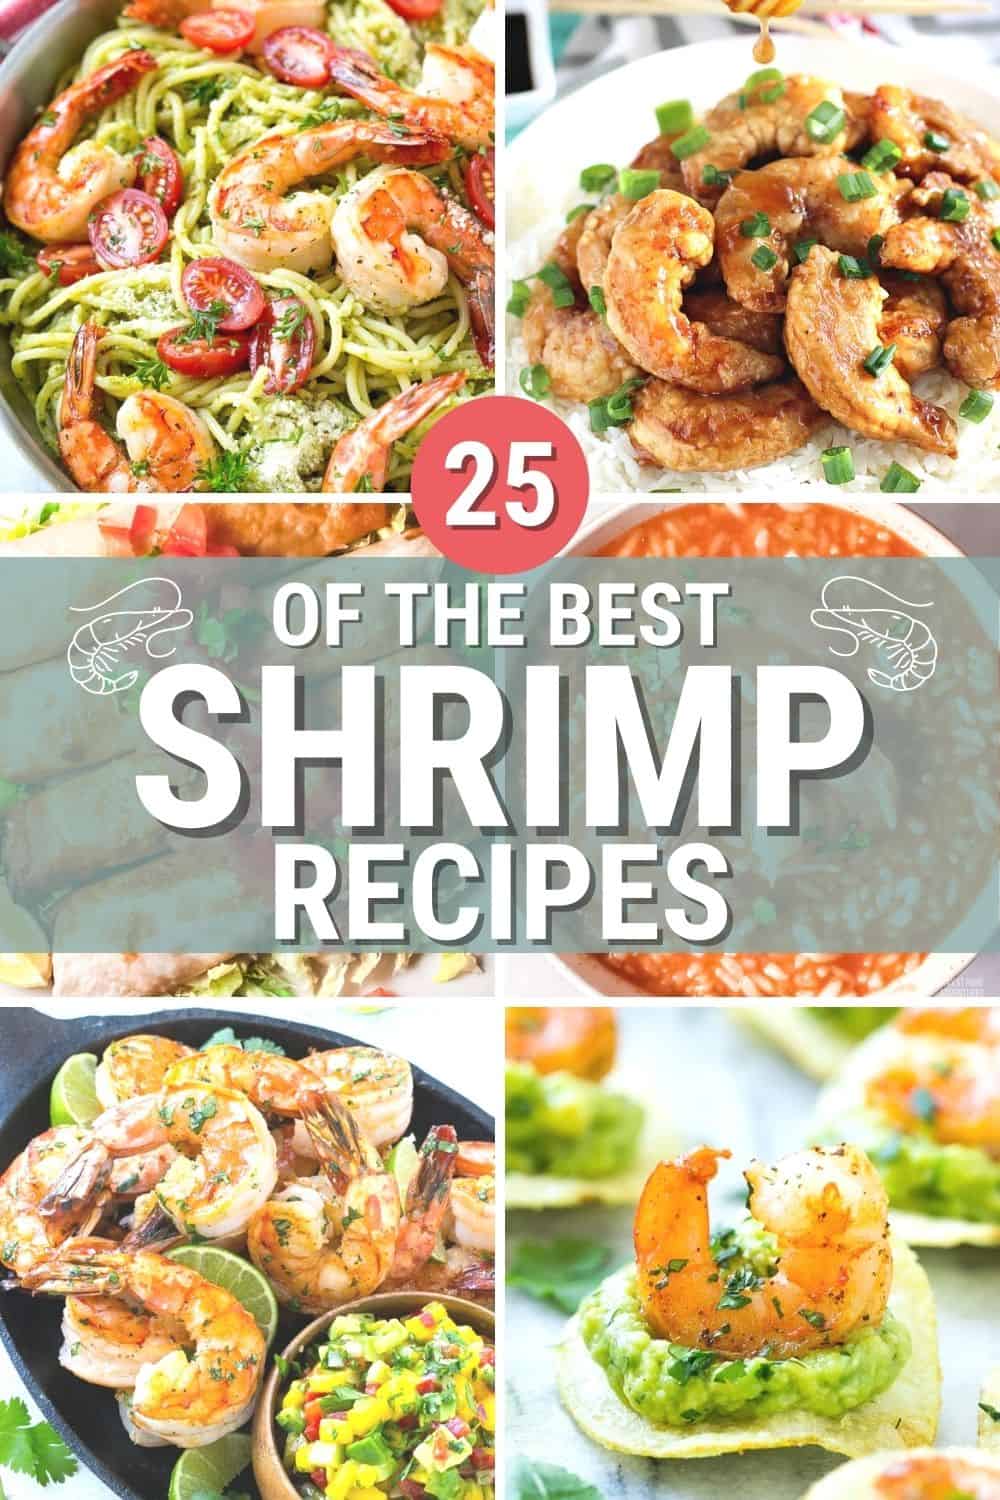 Check out these 25 amazing shrimp recipes to choose from for dinner any night of the week! From shrimp tacos to shrimp ceviche. via @mystayathome